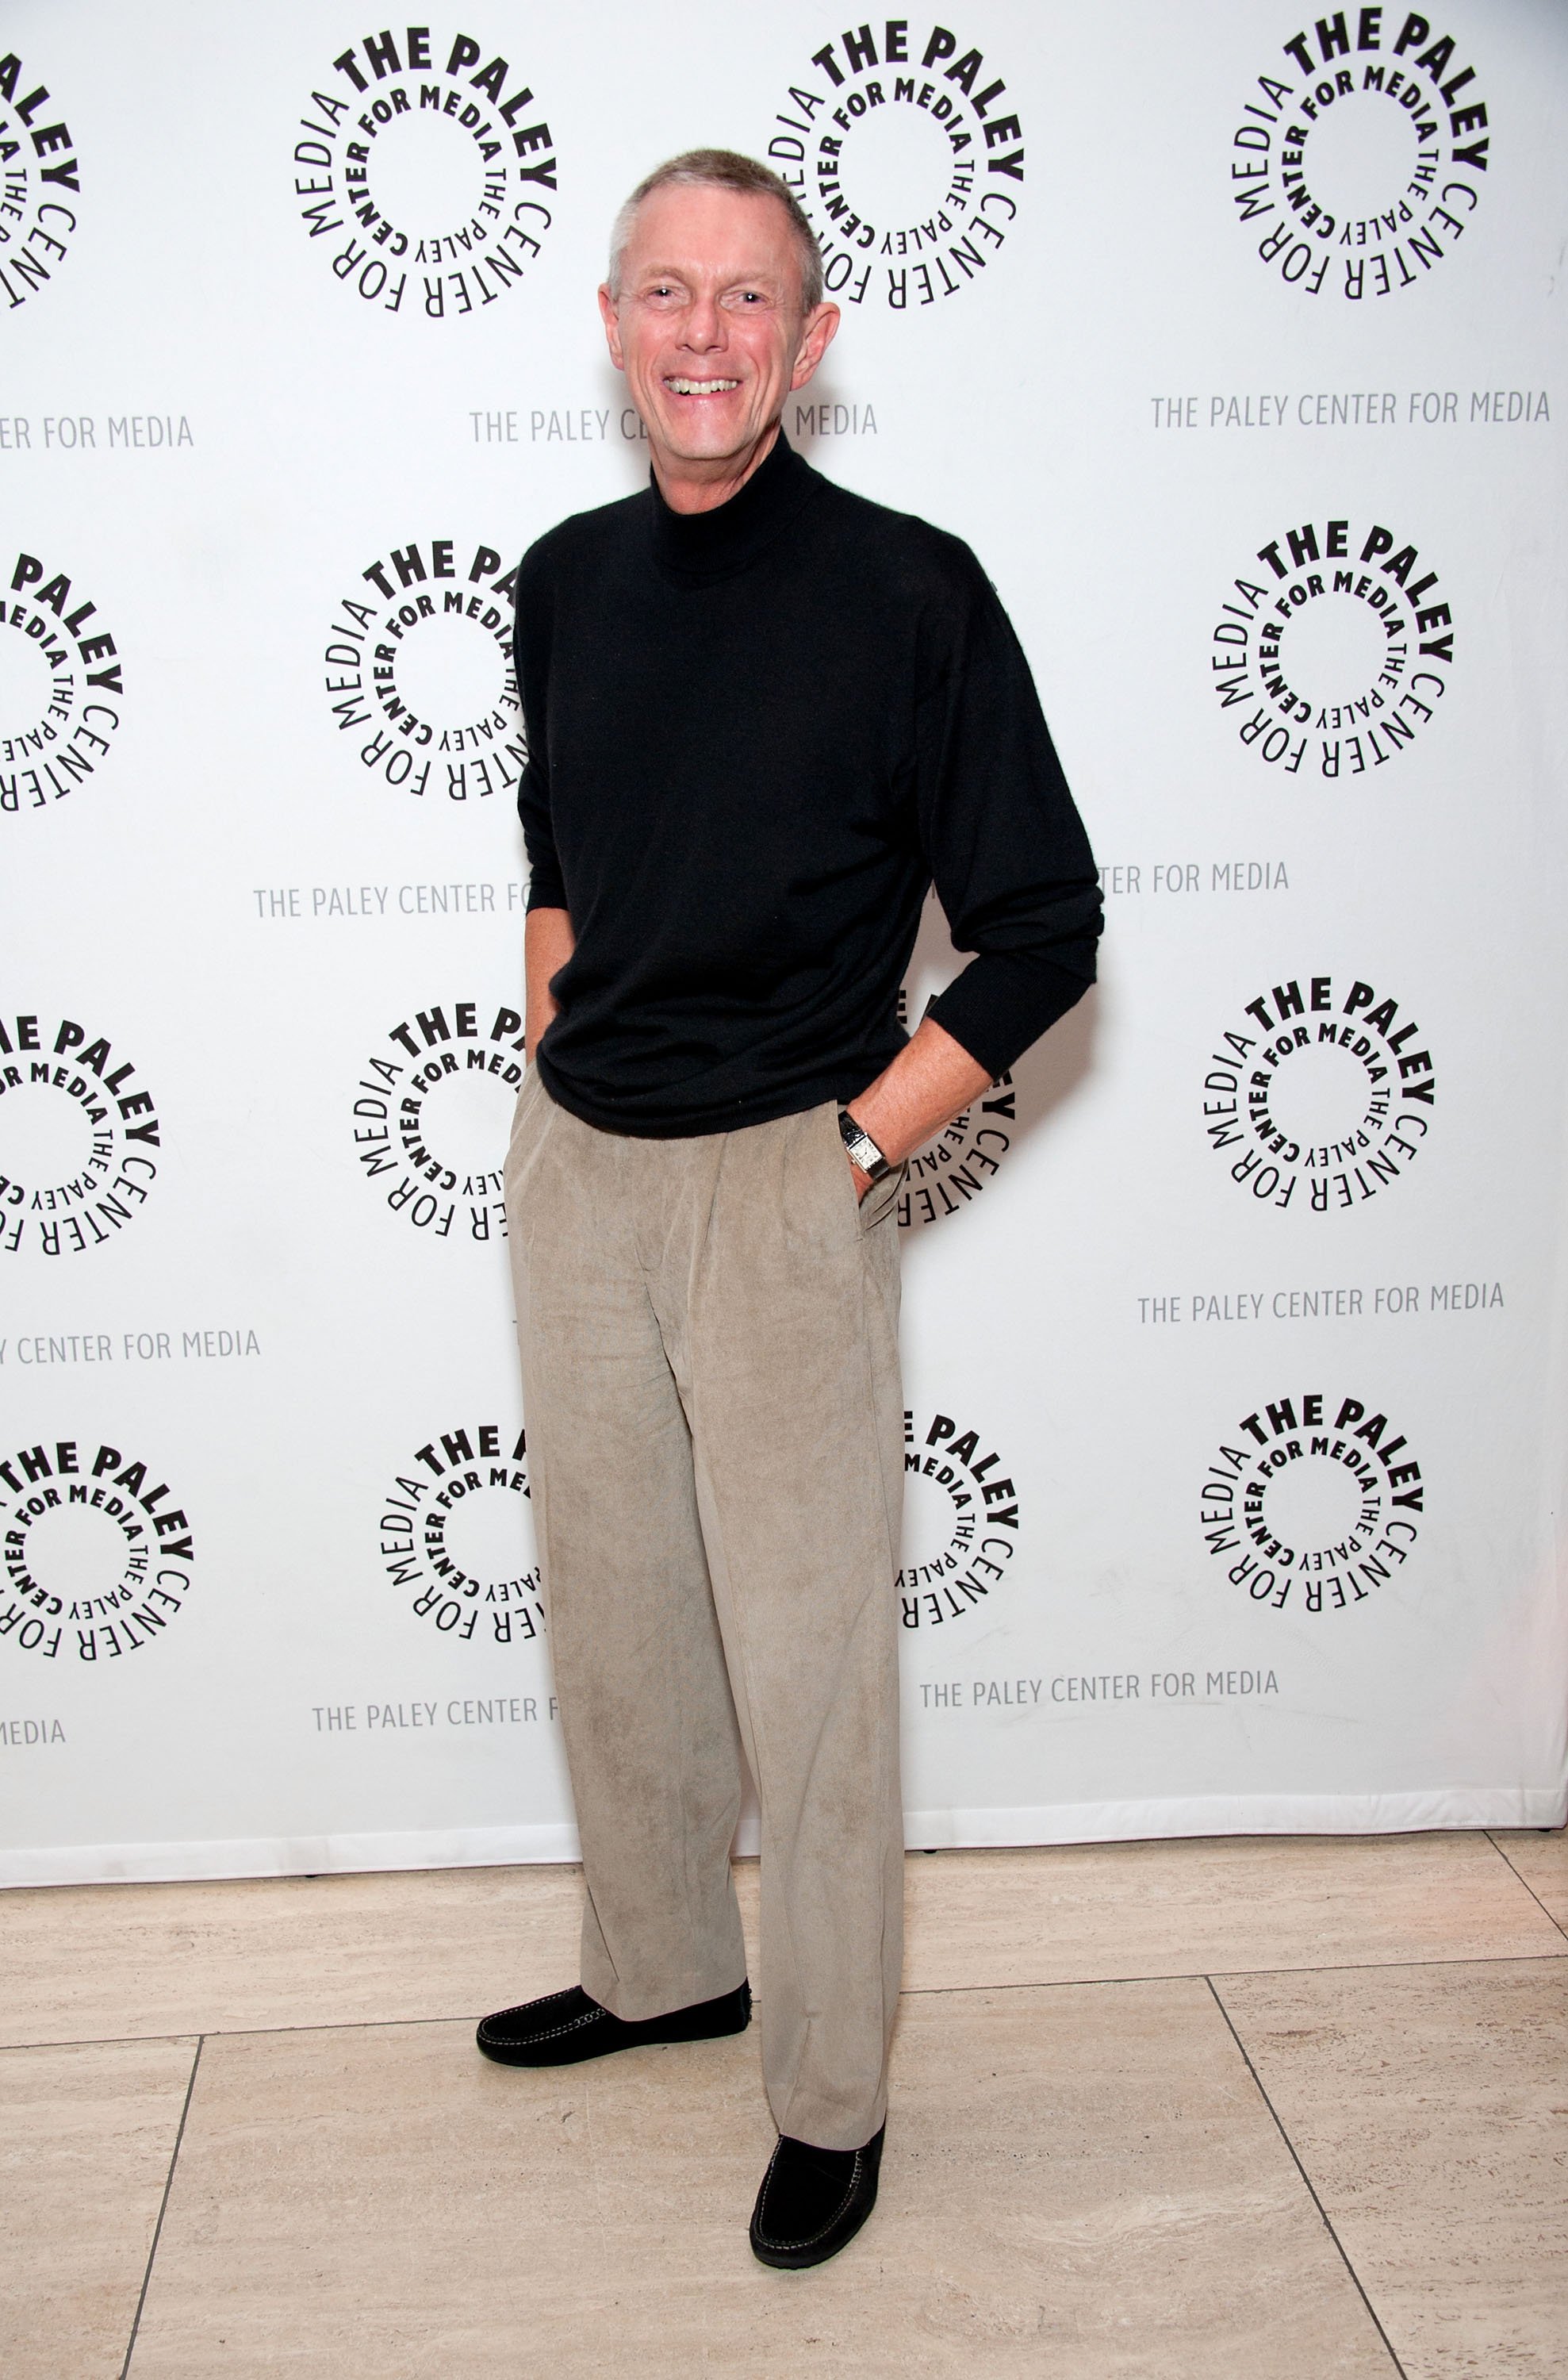 Richard Carpenter on February 21, 2012 in Beverly Hills, California. | Source: Getty Images